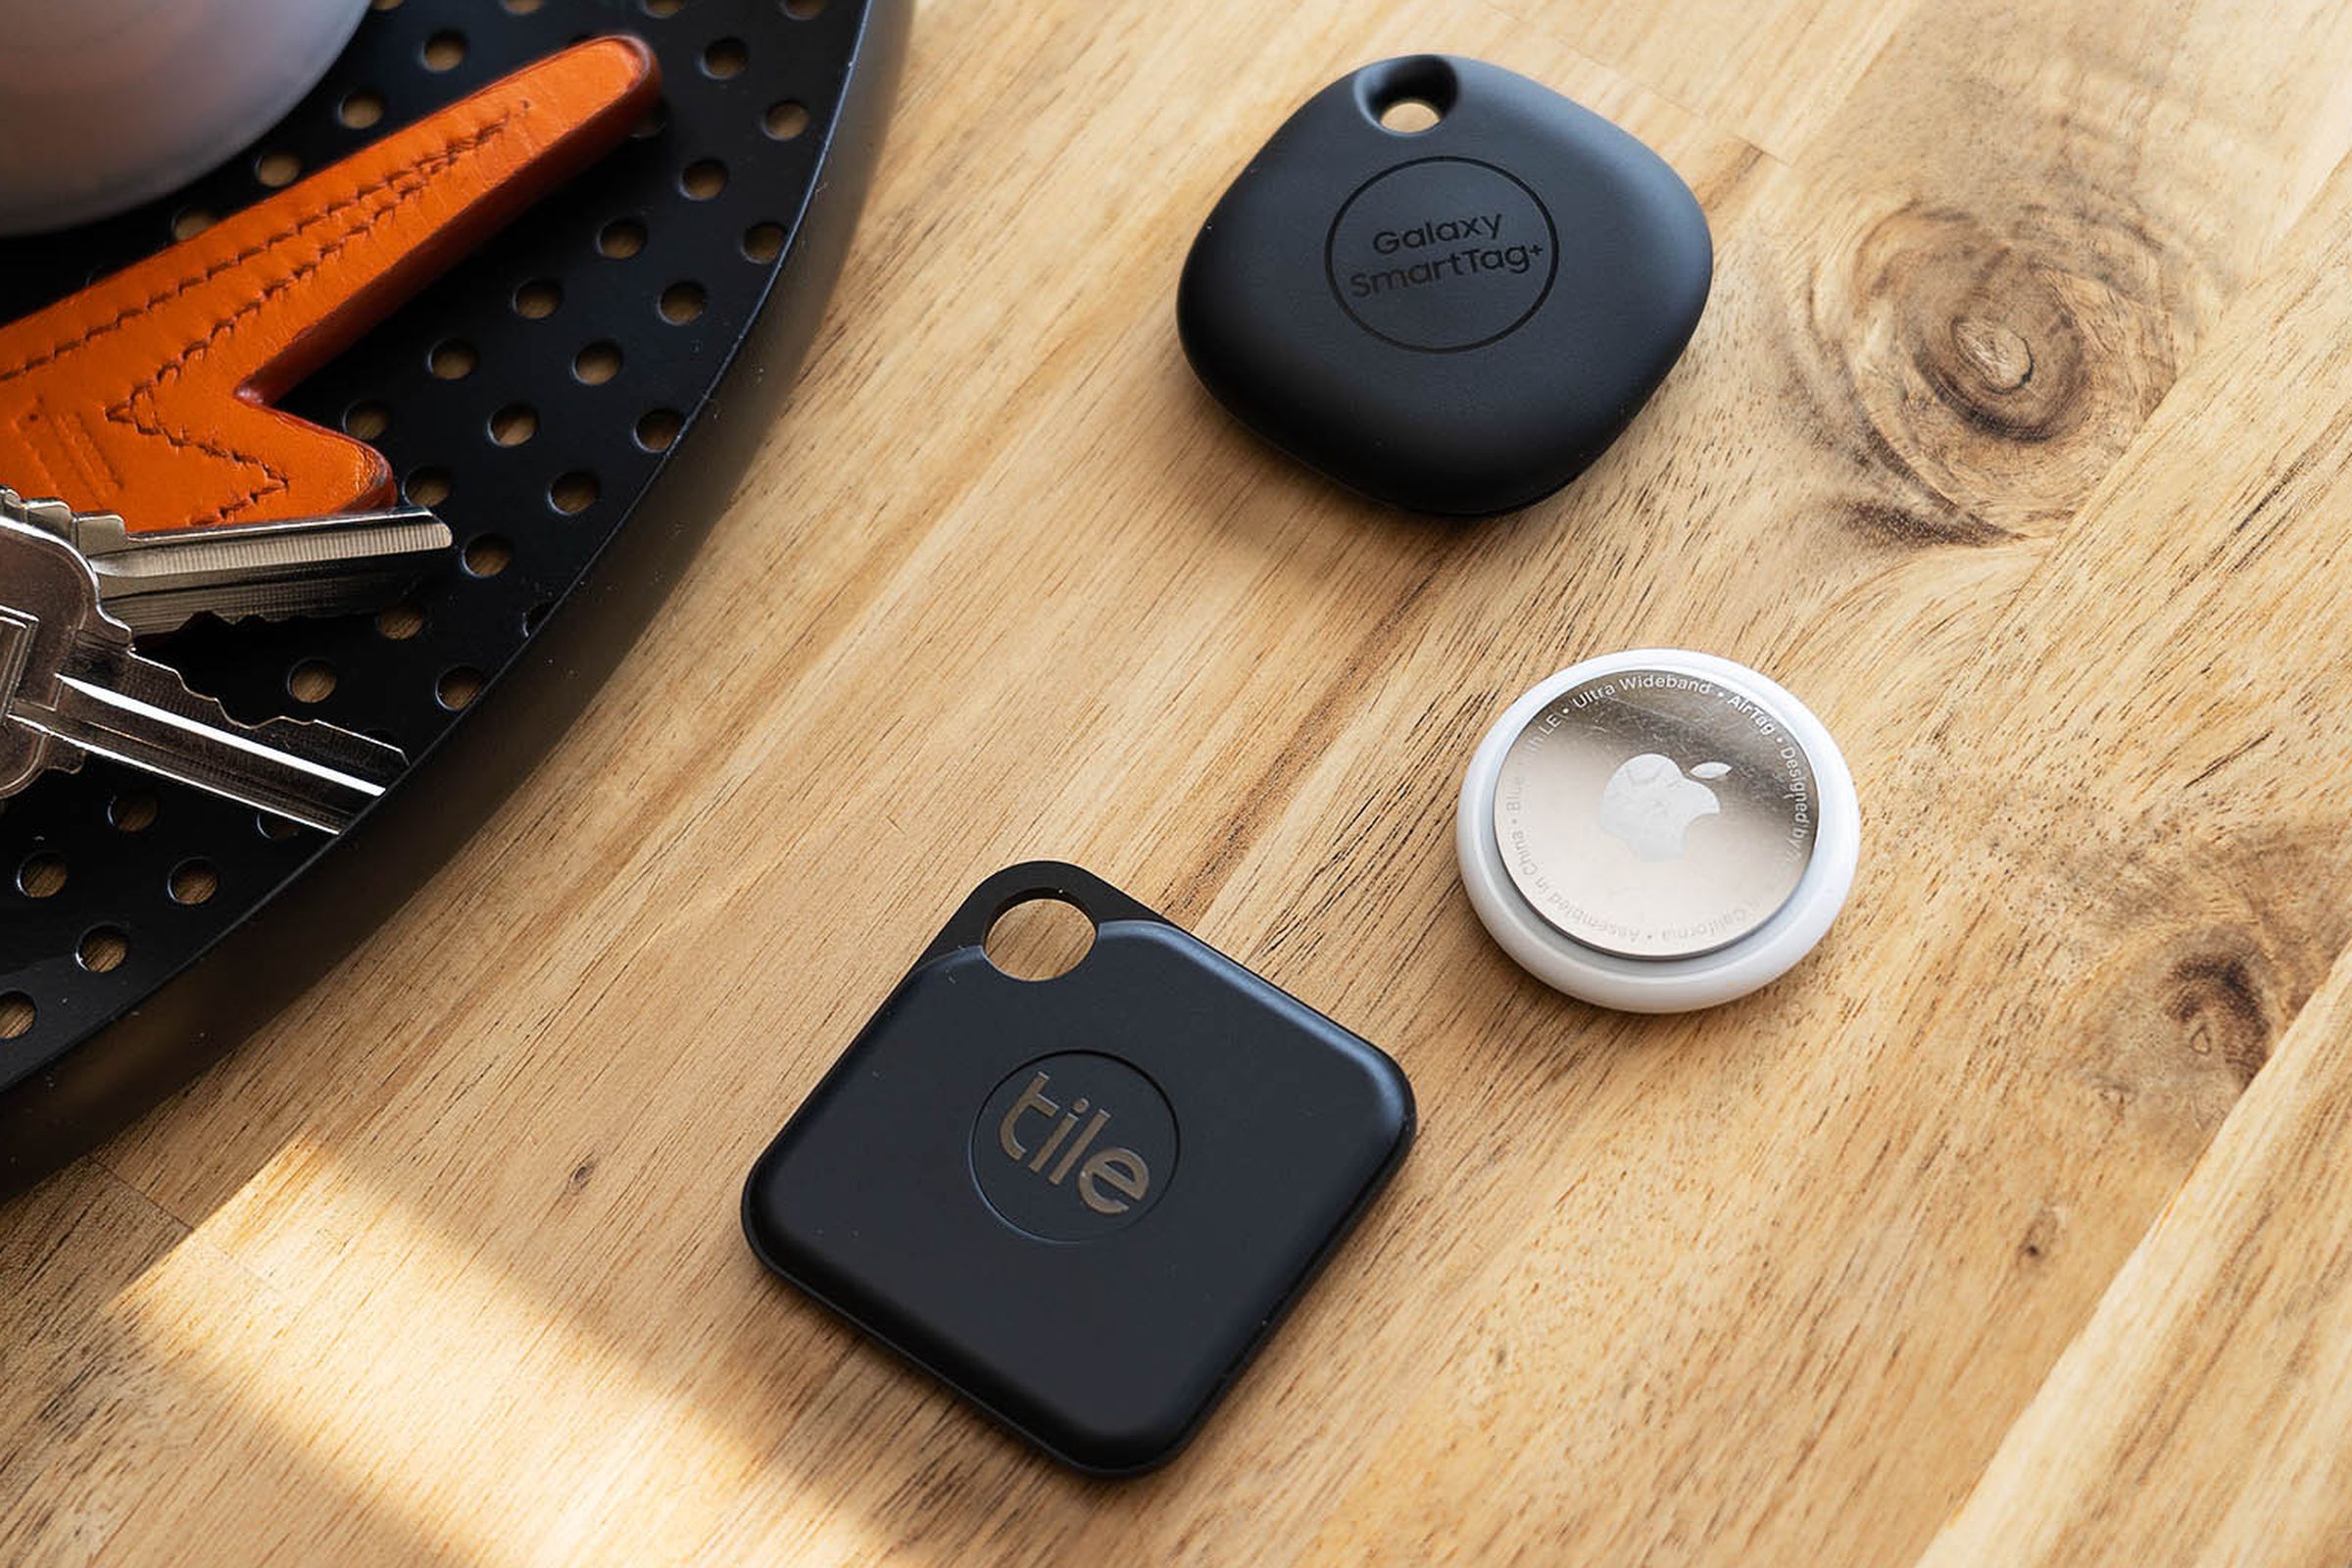 Apple, Tile, and Samsung all offer smart Bluetooth trackers.